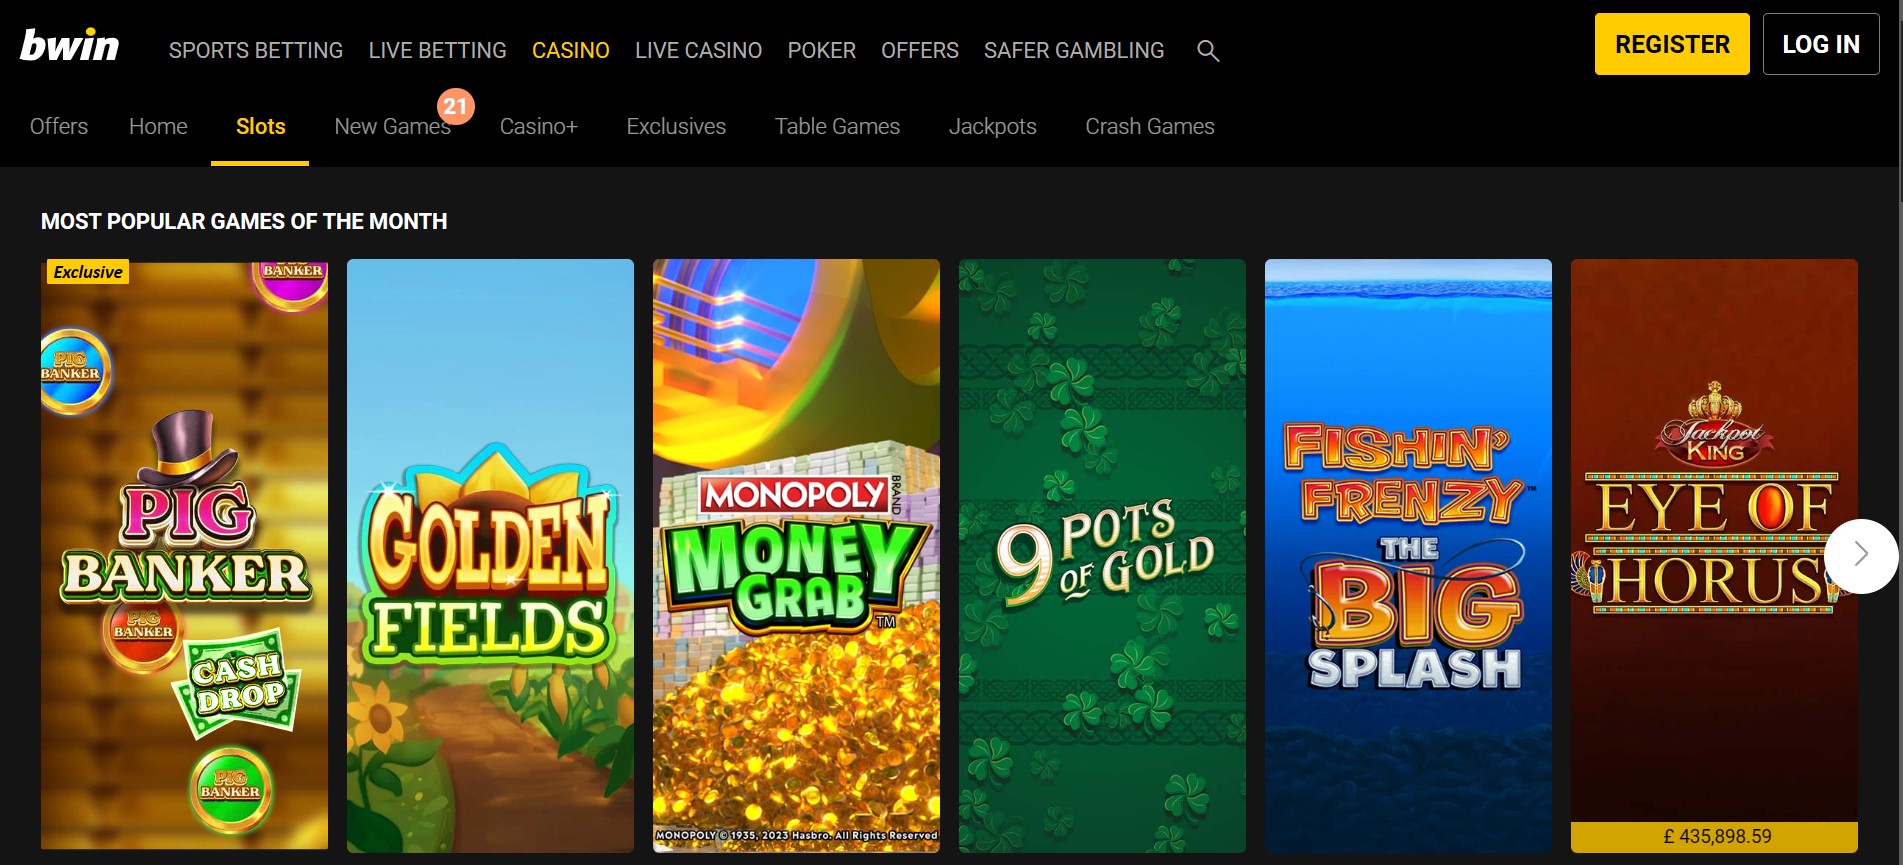 Bwin Casino Games Review